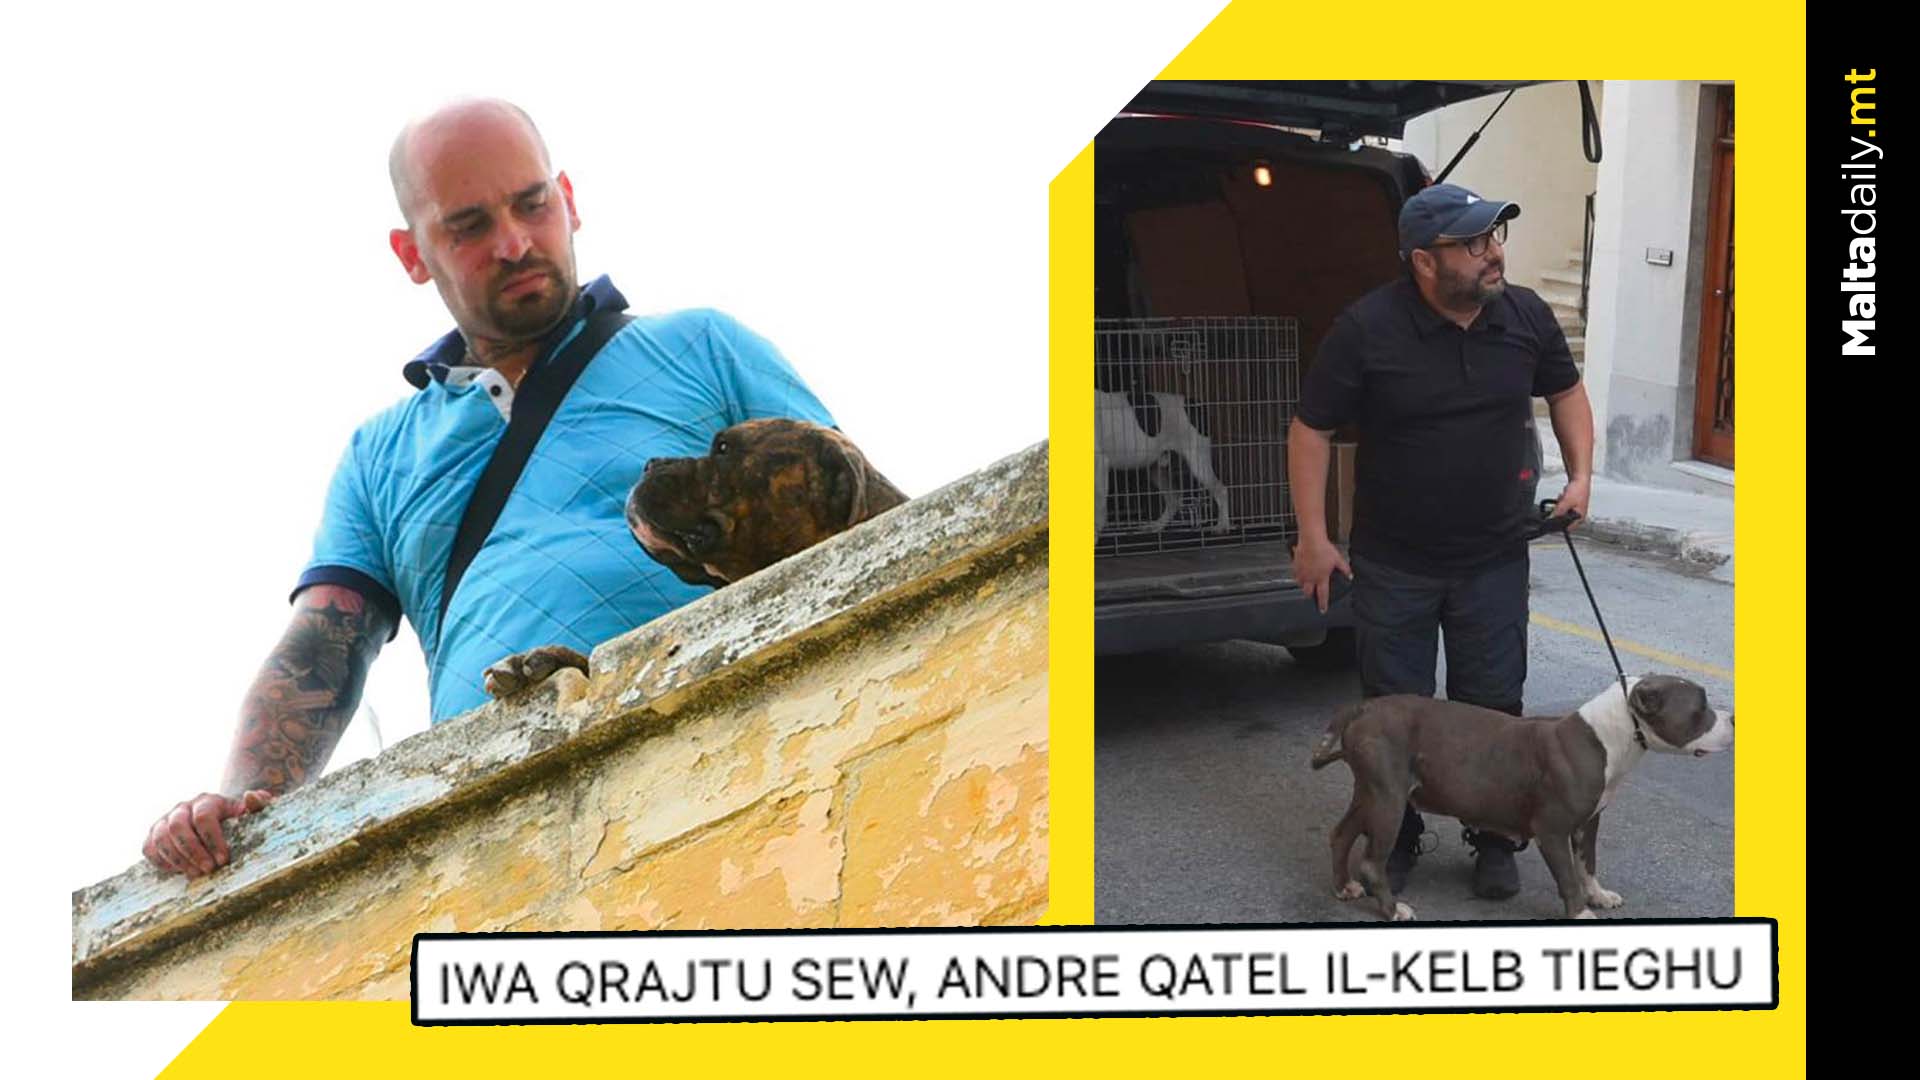 Galea killed one of the attack dogs himself, activist alleges